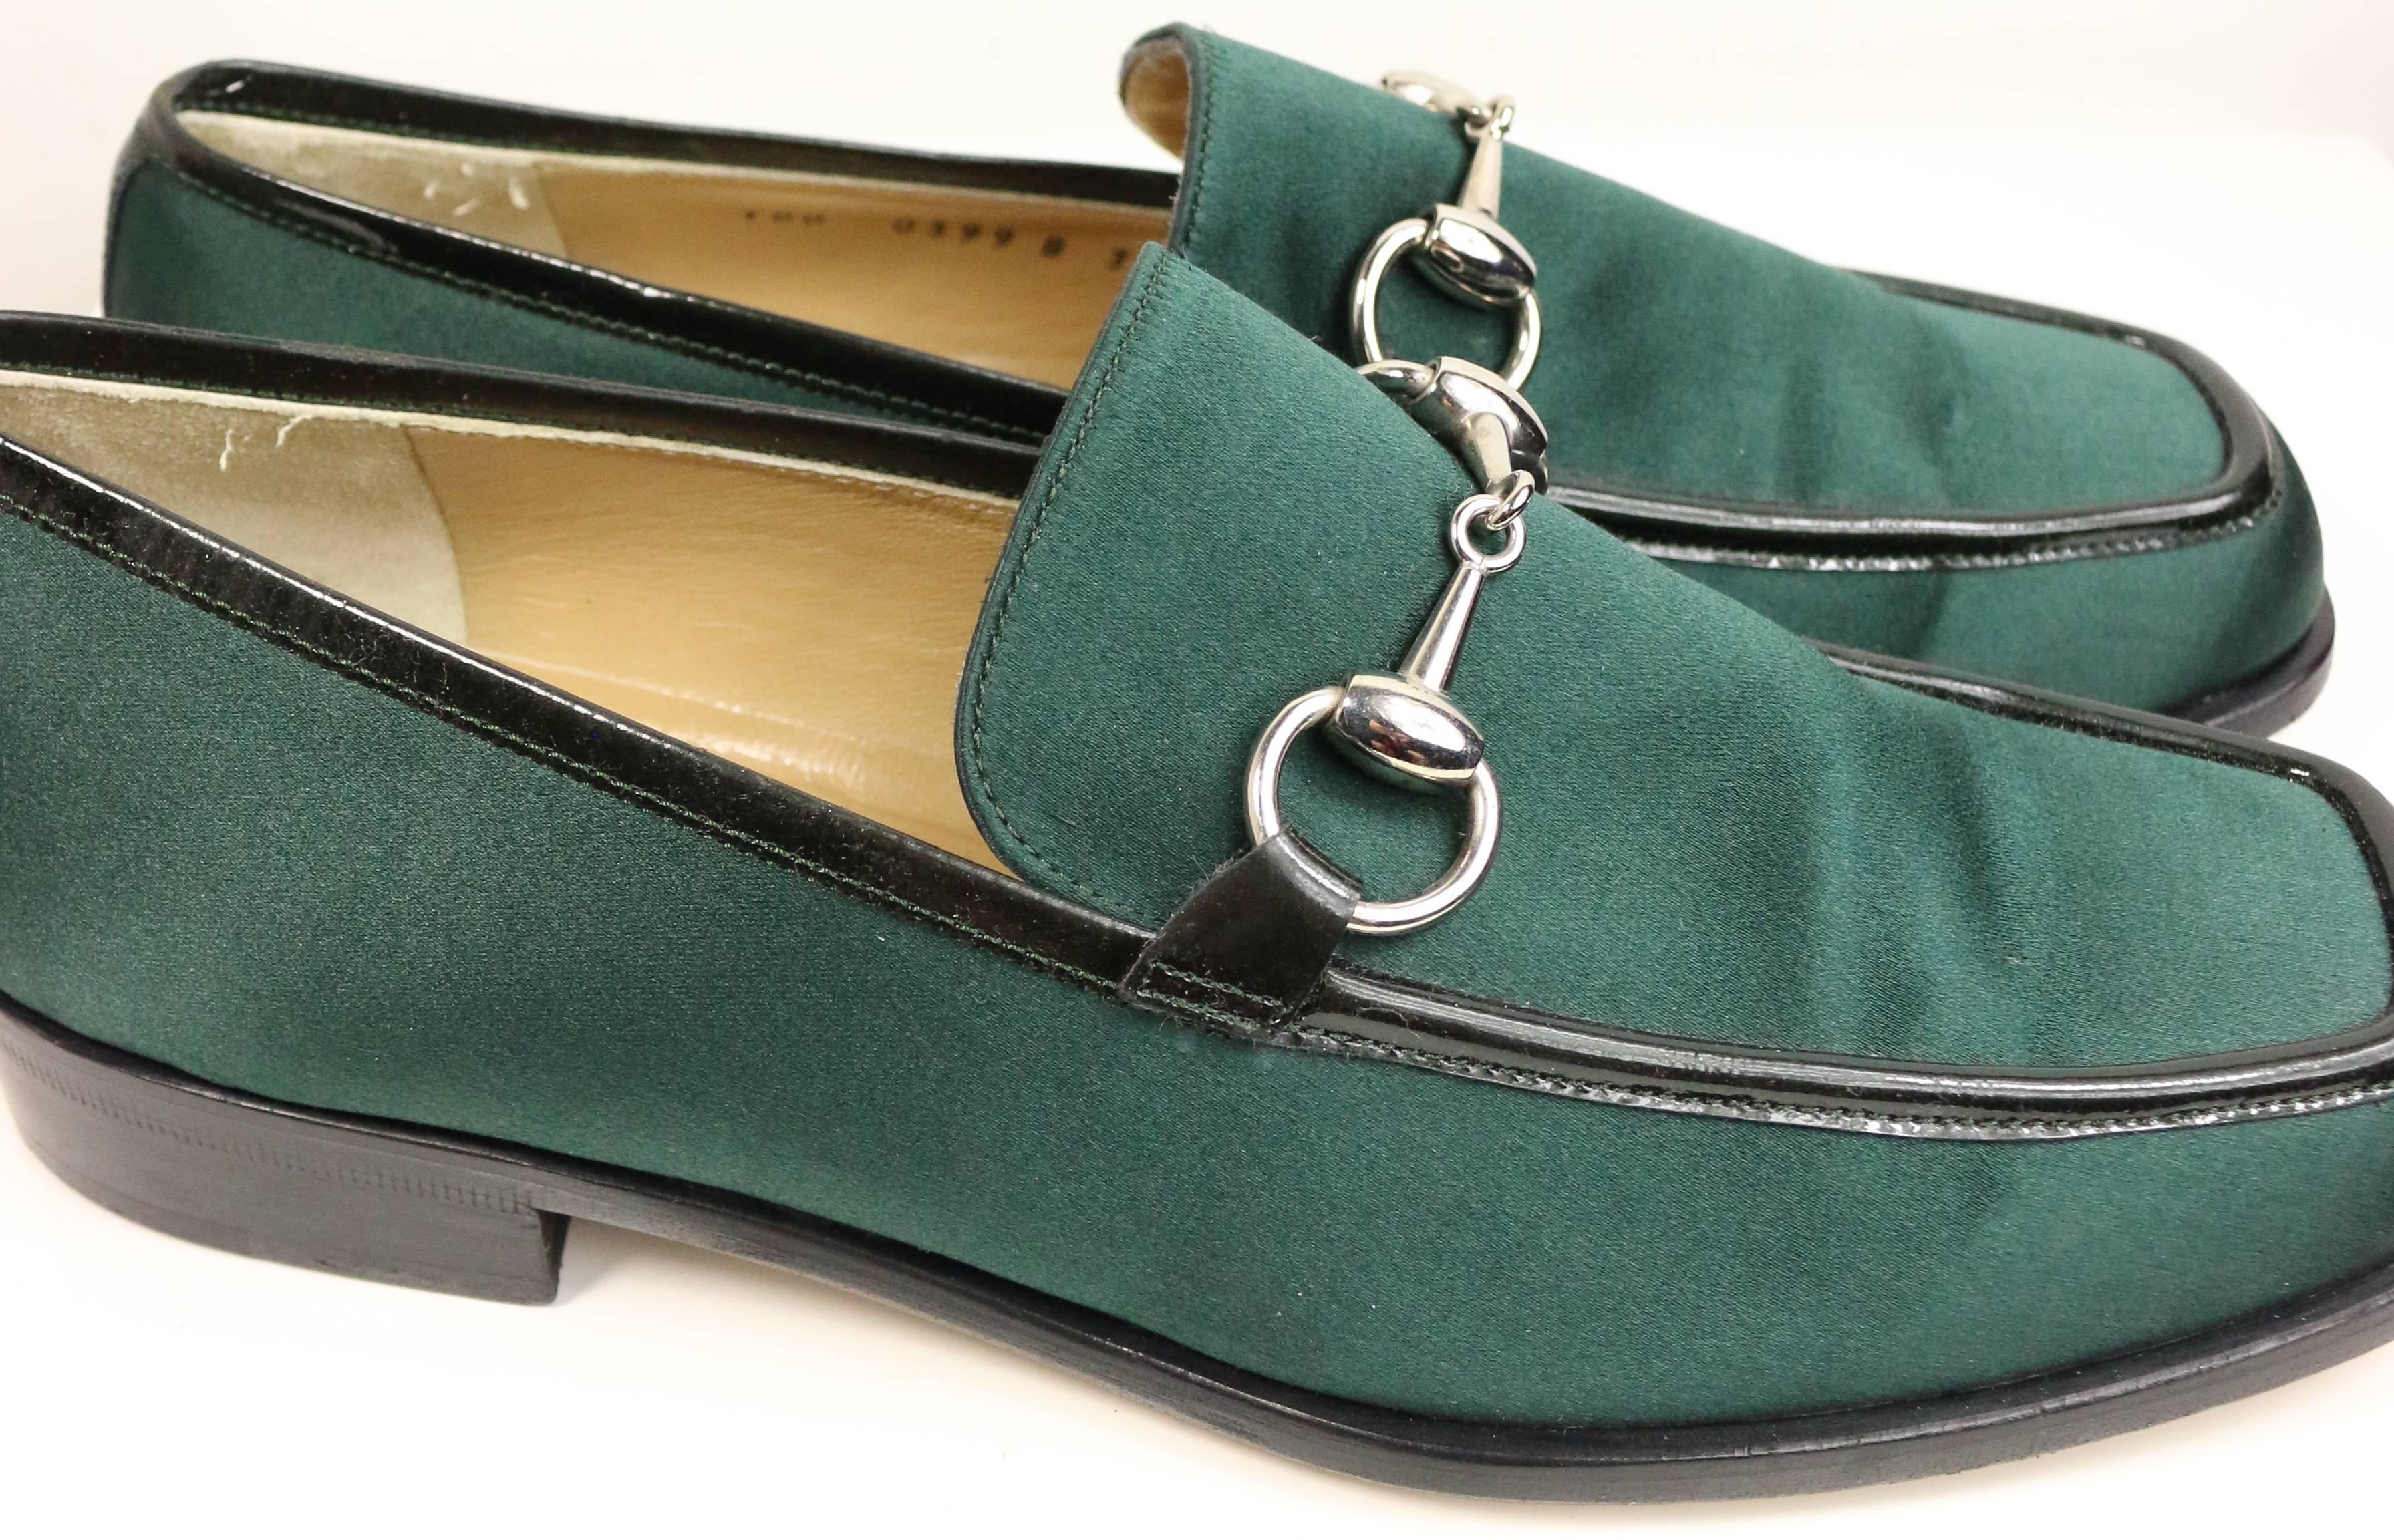 - Fall 1996 Gucci by Tom Ford classic green satin with signature silver buckle and black patent piping trim loafer. It is a true classic!!! 

- Size 37. 

